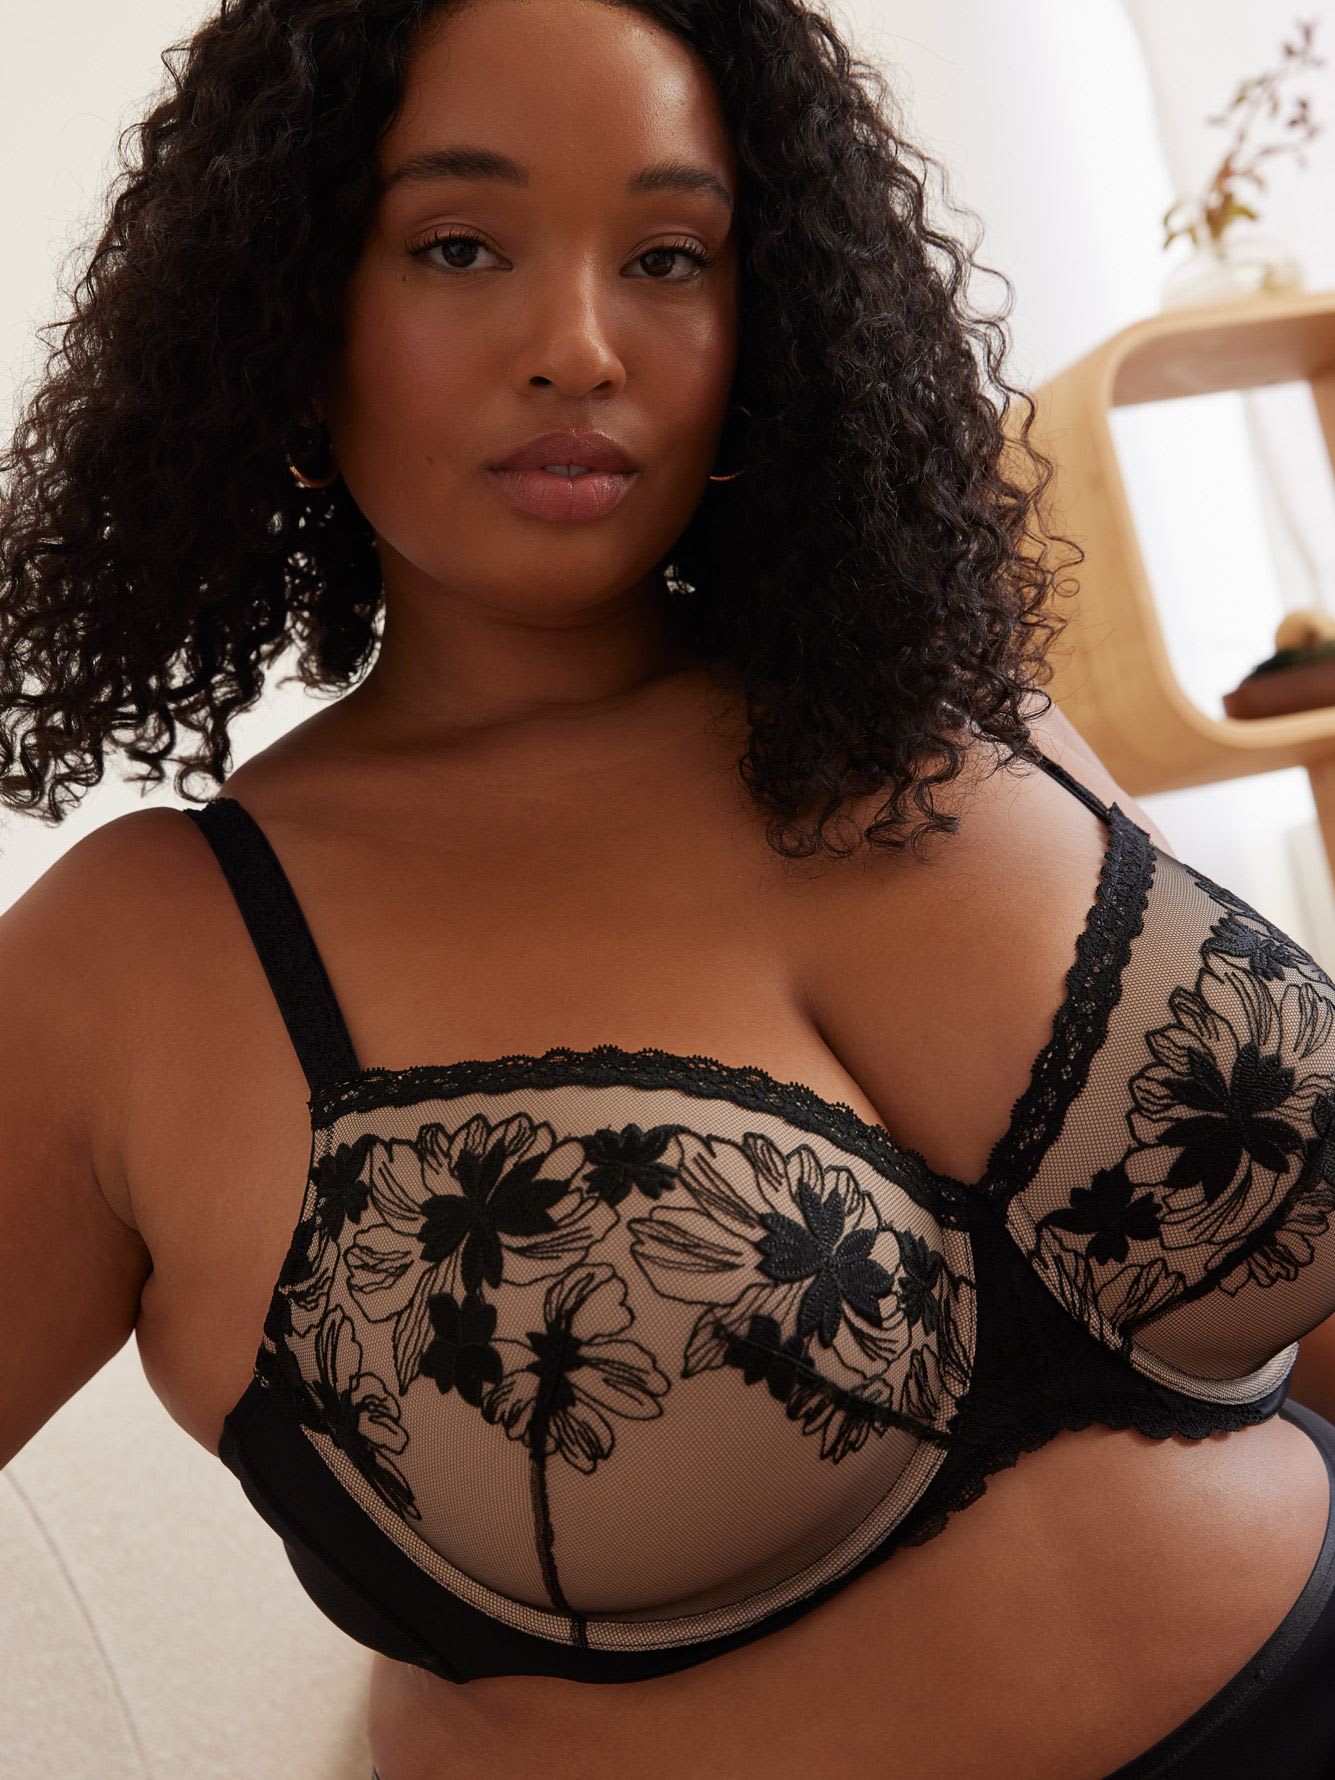 Black Underwire Padded Balconette Bra with Lace Trim - Déesse Collection